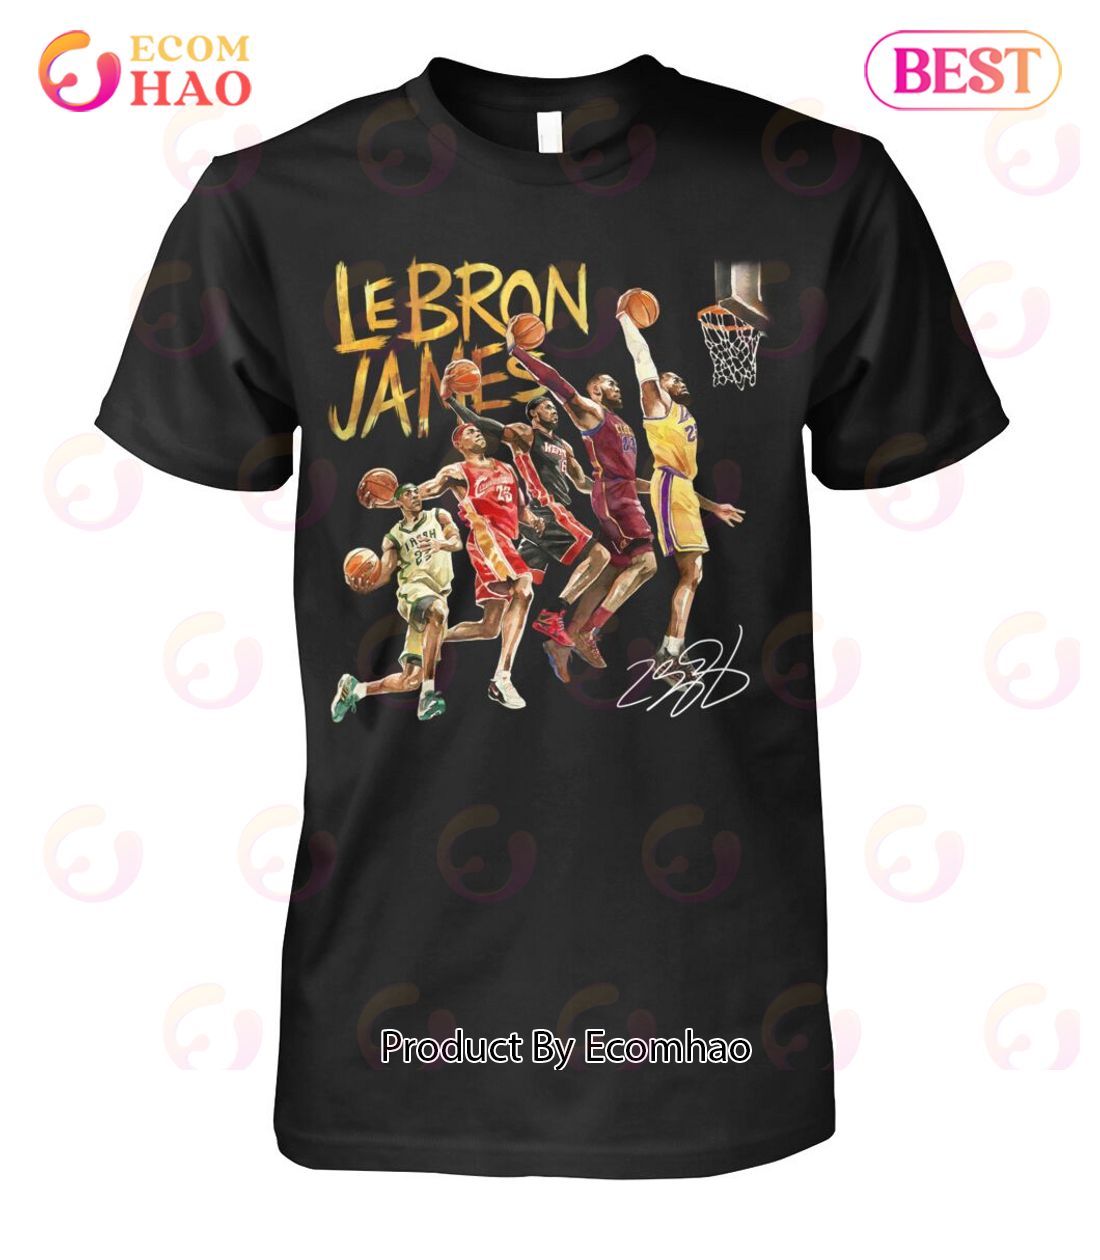 LeBron James Nike T-shirt designed by San Jose 11-year-old – The